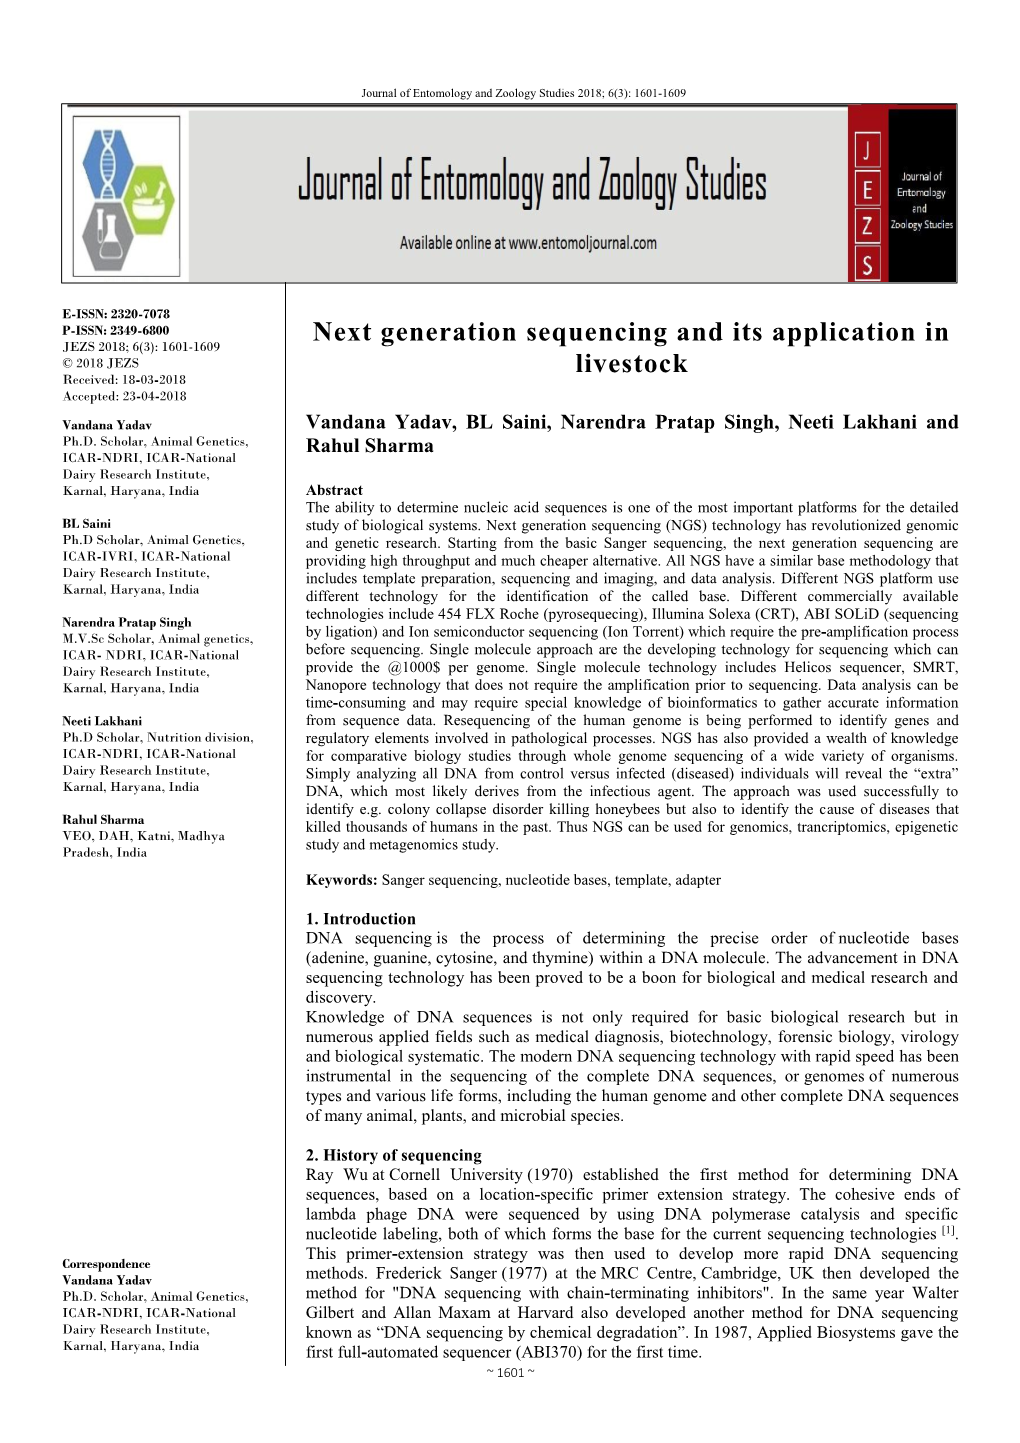 Next Generation Sequencing and Its Application in Livestock